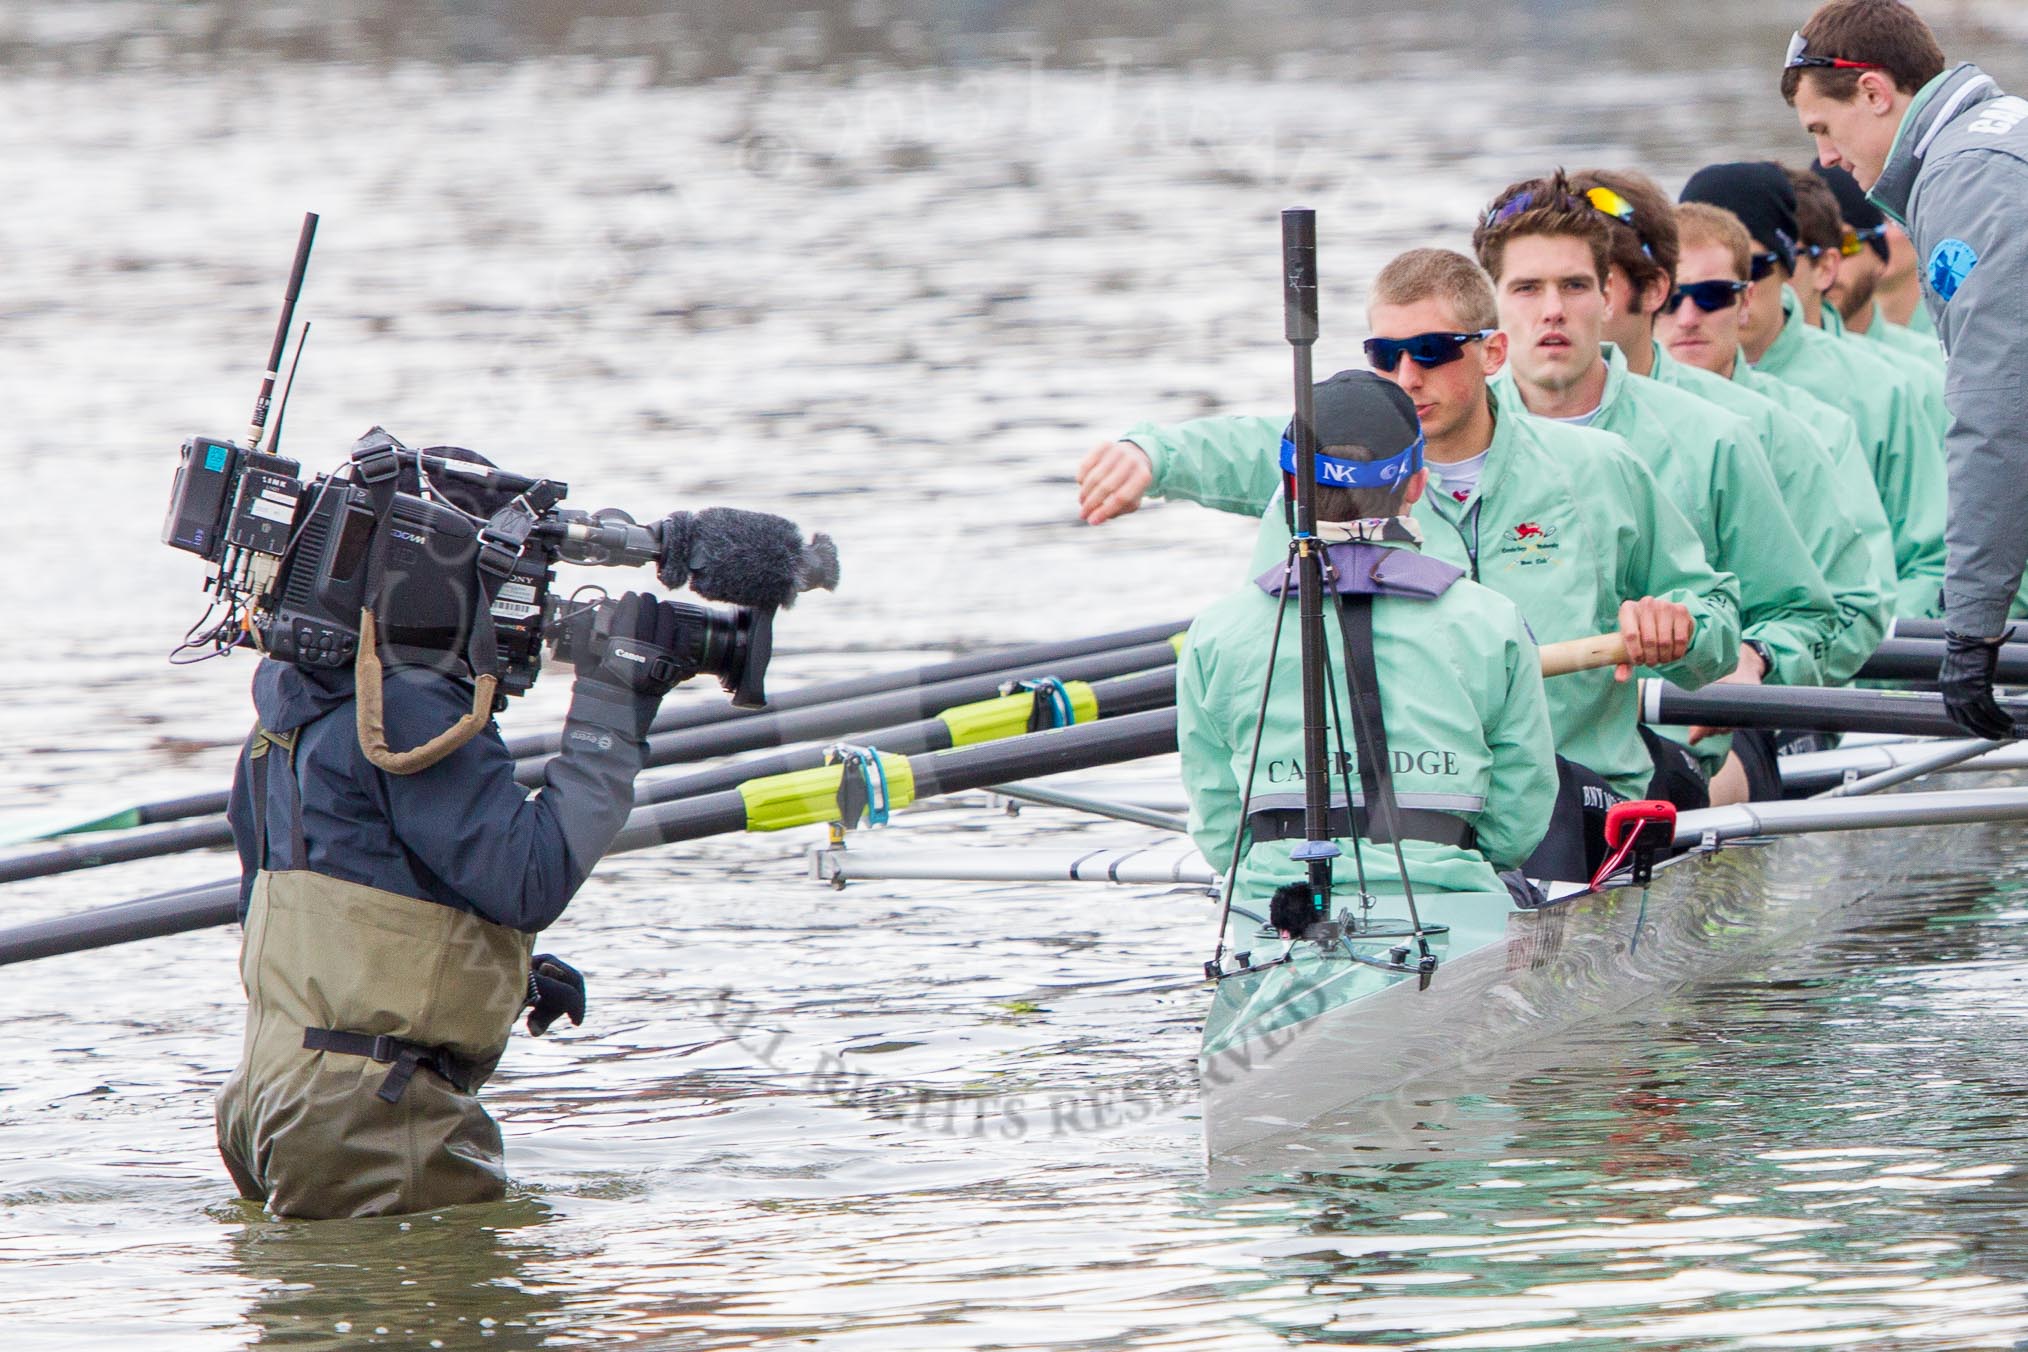 The Boat Race 2013.
Putney,
London SW15,

United Kingdom,
on 31 March 2013 at 15:48, image #173